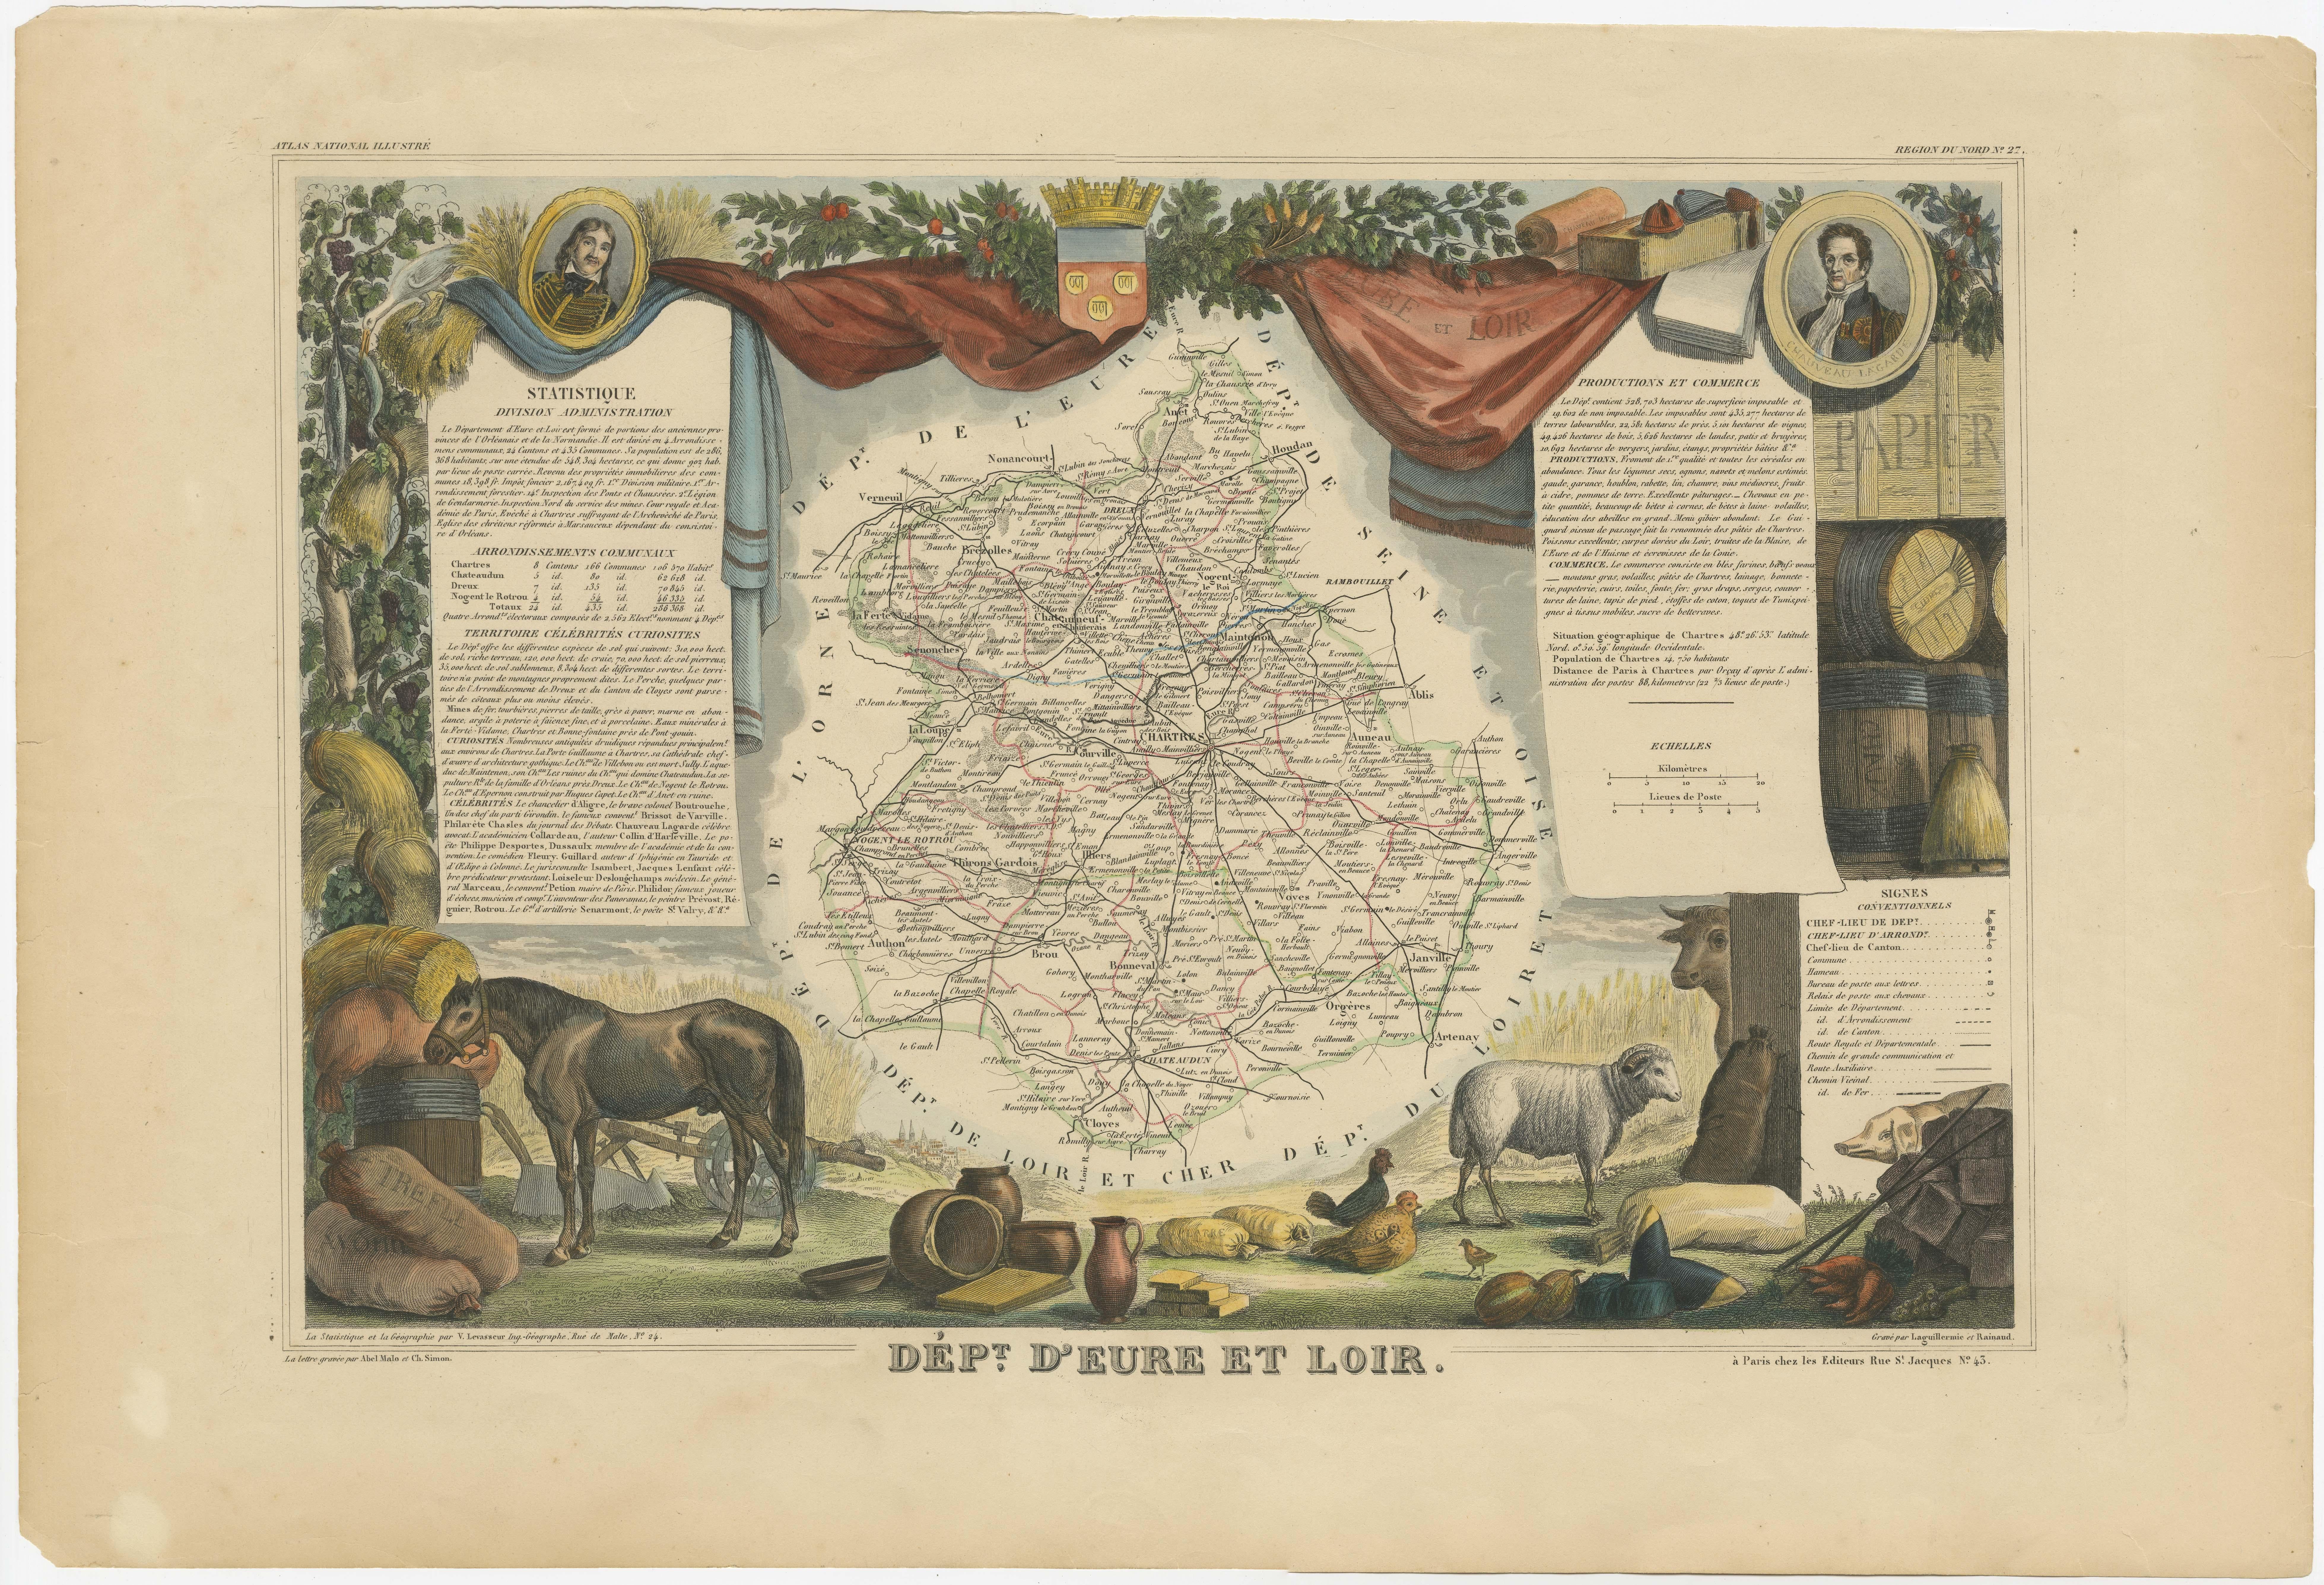 Antique map titled 'Dépt. d'Eure et Loir'. Map of the French department of Eure-et-Loir, France. This area is home to the famous Chartres Cathedral. The whole is surrounded by elaborate decorative engravings designed to illustrate both the natural